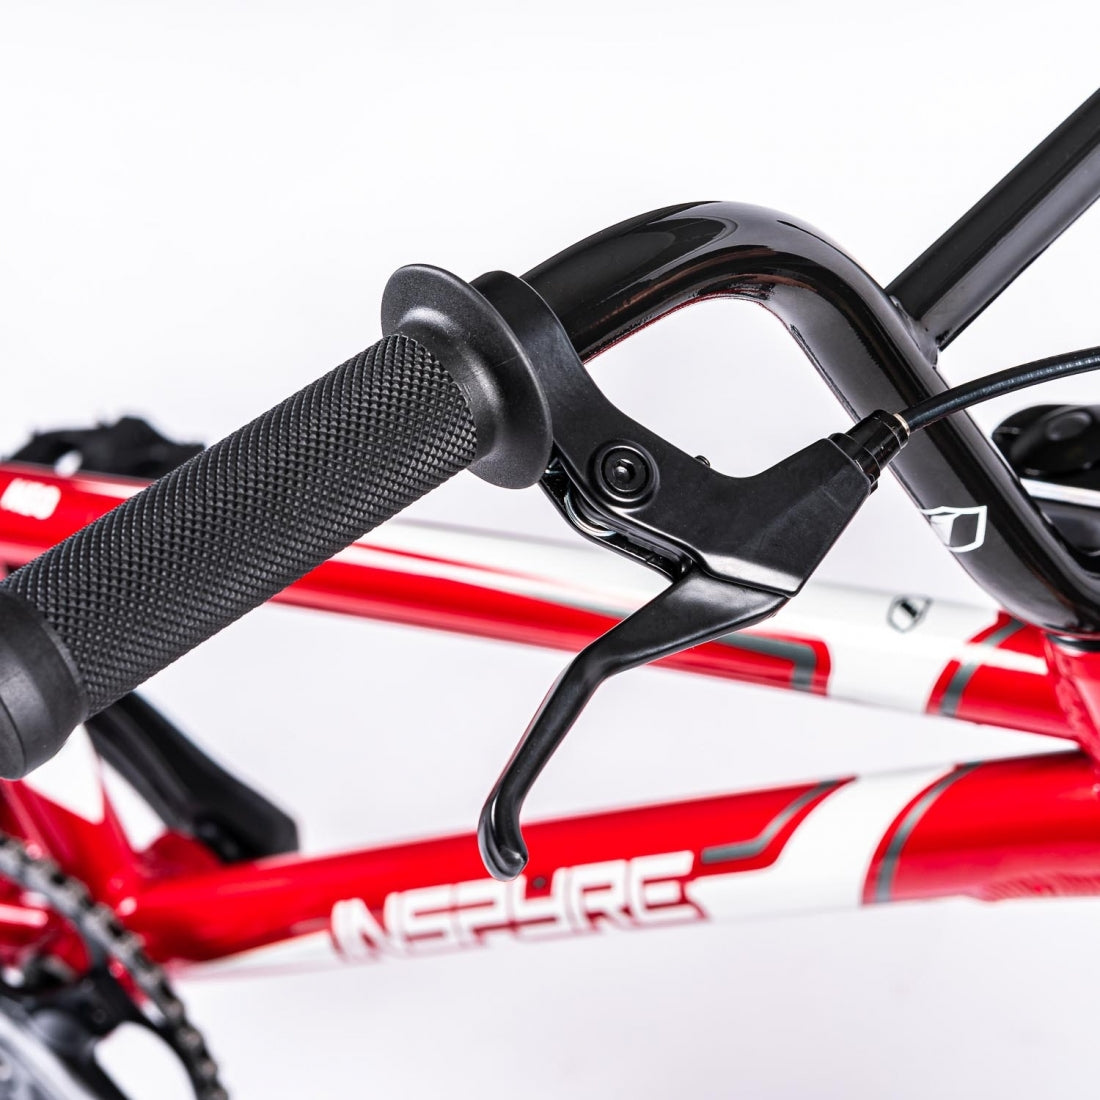 Close-up of an Inspyre Neo Expert Bike's handlebar, brake lever, and part of the frame against a white background.